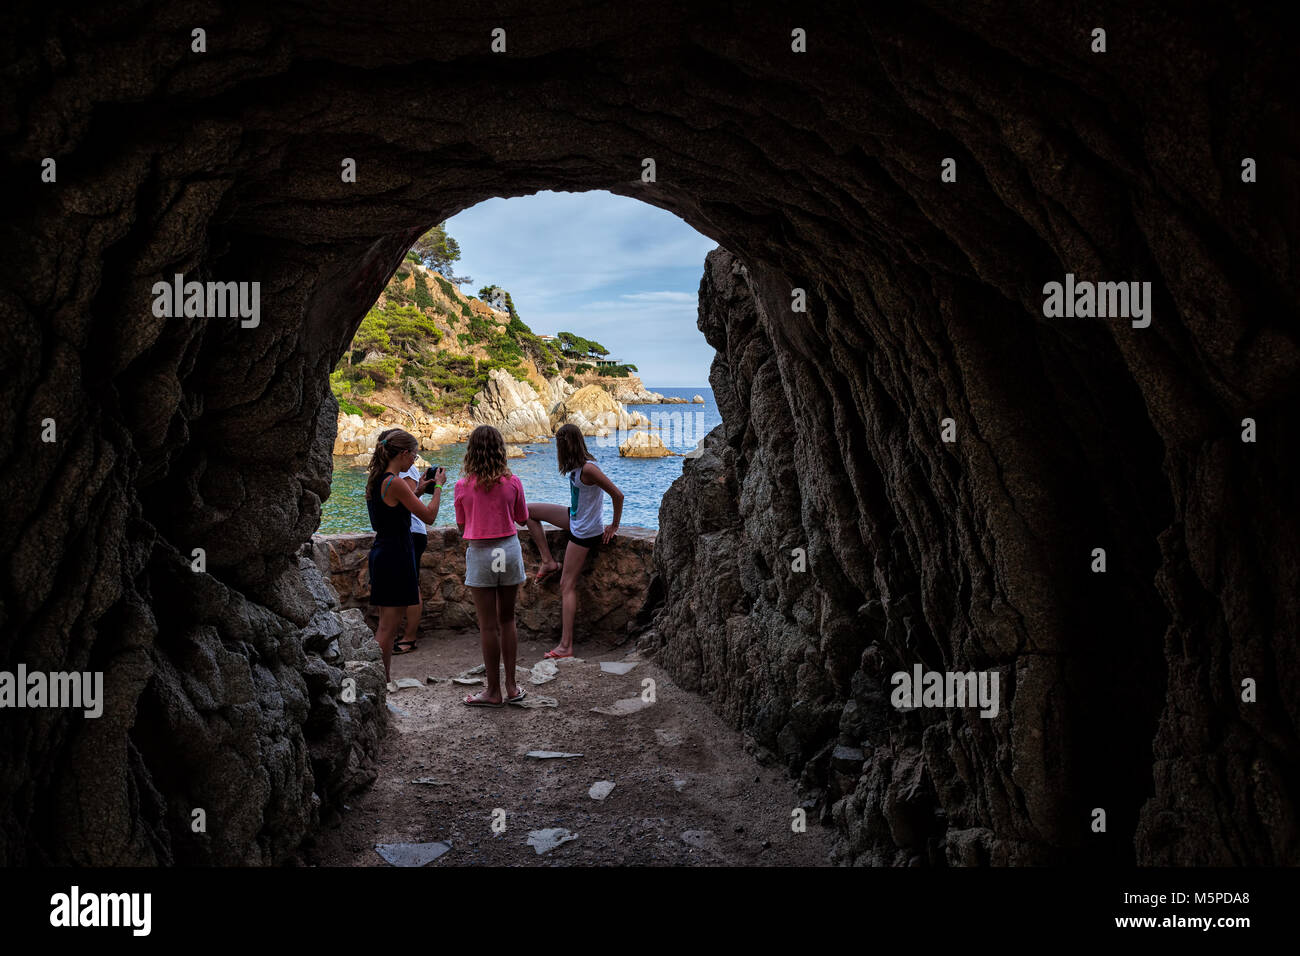 Coastal cave below the cliff, adventure travel scenery, young girls looking to the sea, Lloret de Mar, Costa Brava, Catalonia, Spain, Europe Stock Photo